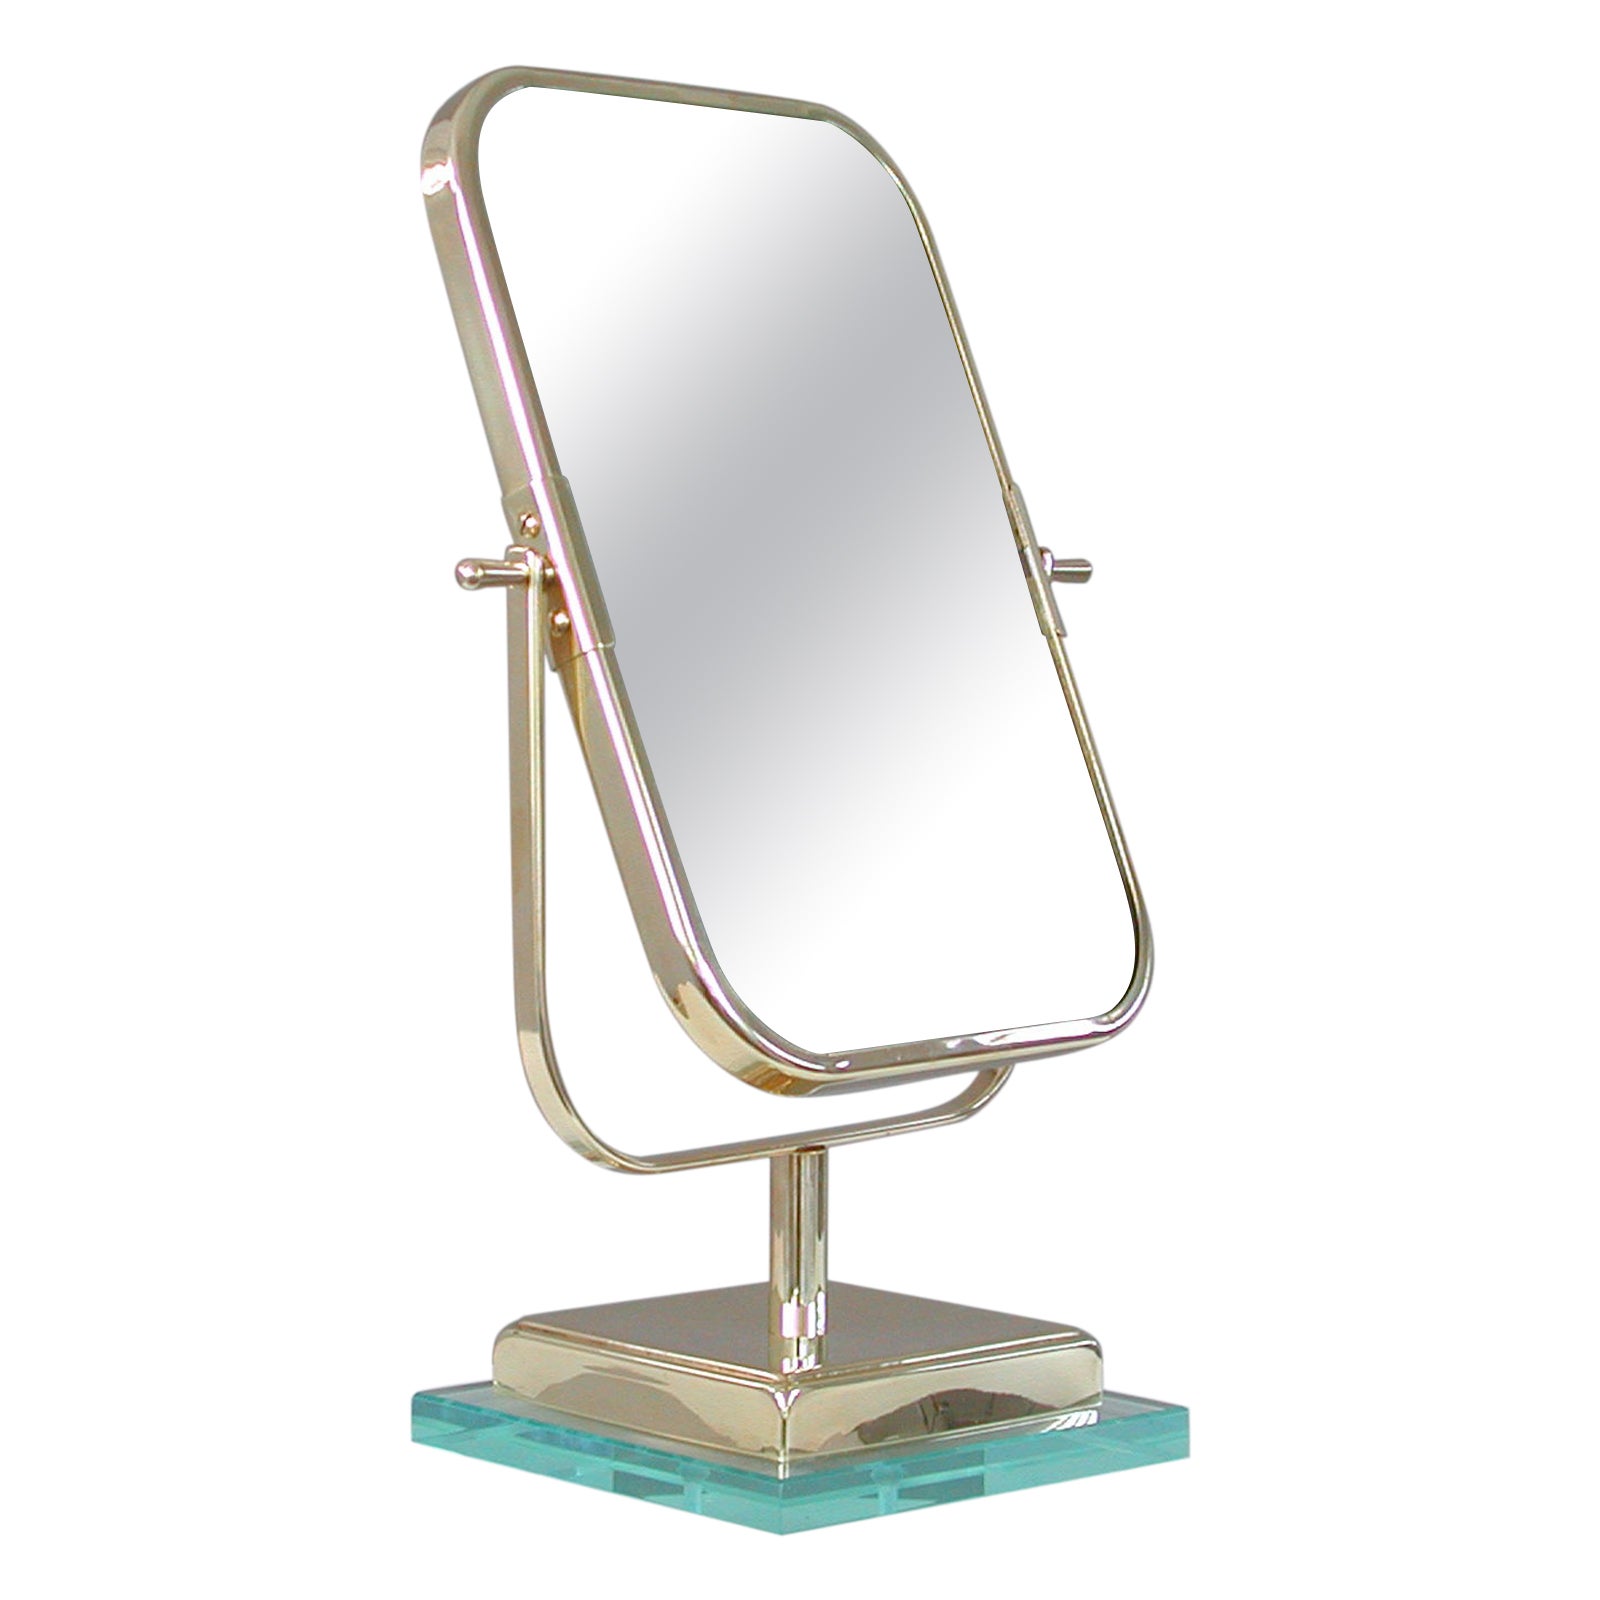 Italian Brass and Glass Double Sided Table Mirror 1950s, Fontana Arte Style